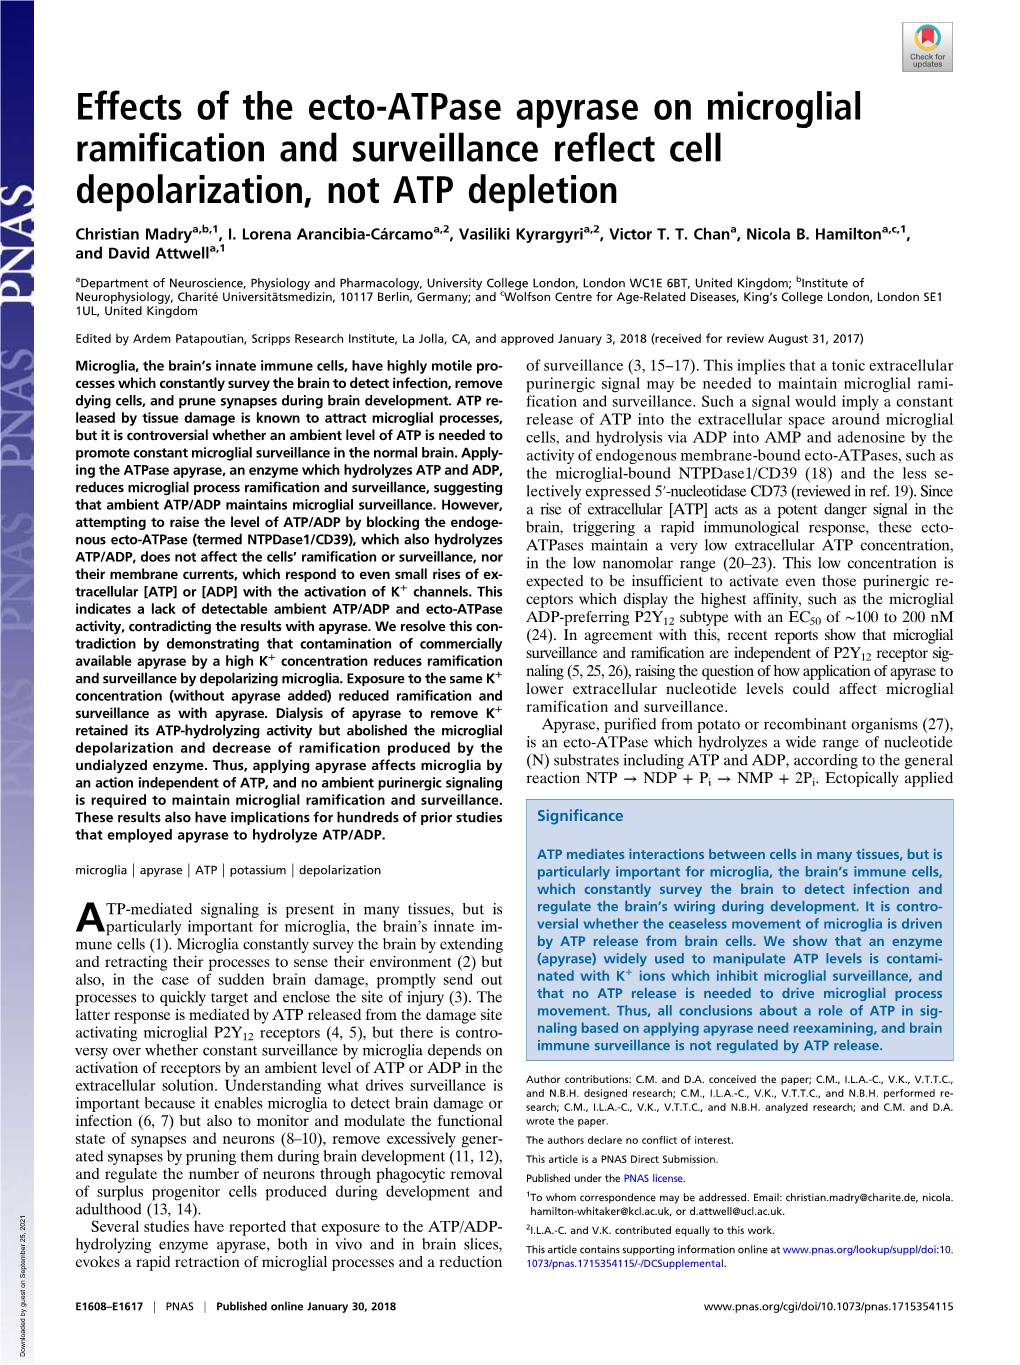 Effects of the Ecto-Atpase Apyrase on Microglial Ramification and Surveillance Reflect Cell Depolarization, Not ATP Depletion